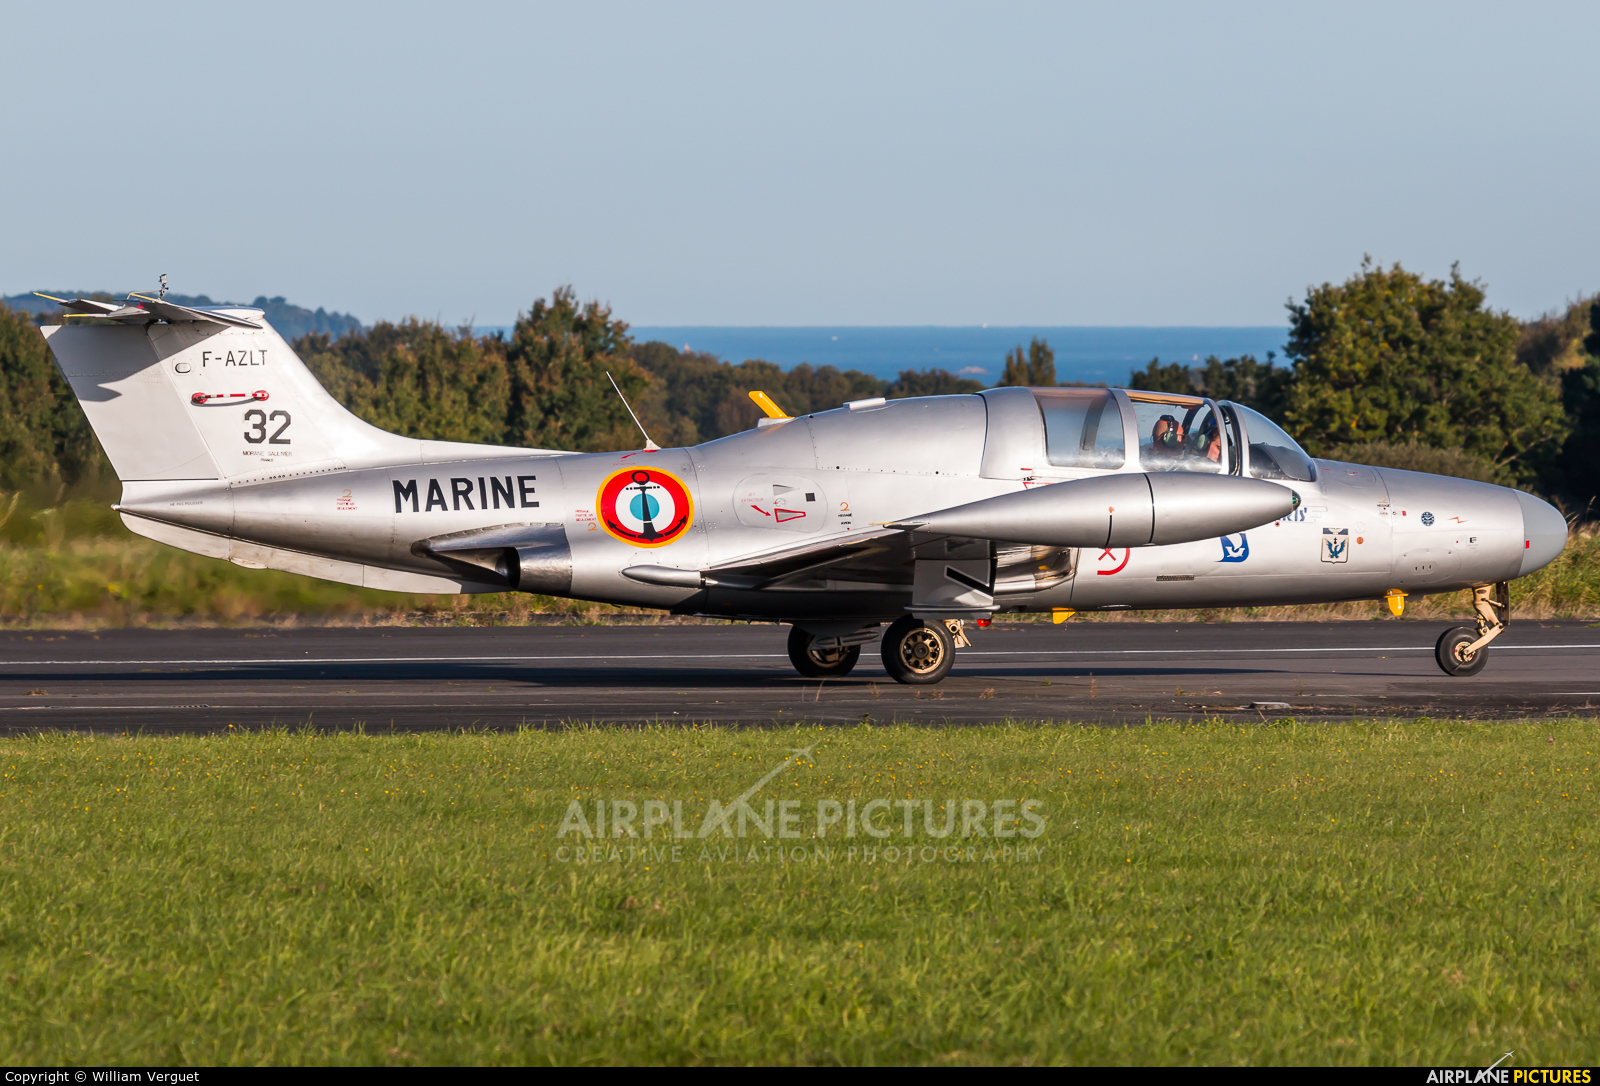 Private F-AZLT aircraft at Morlaix Ploujean Airport